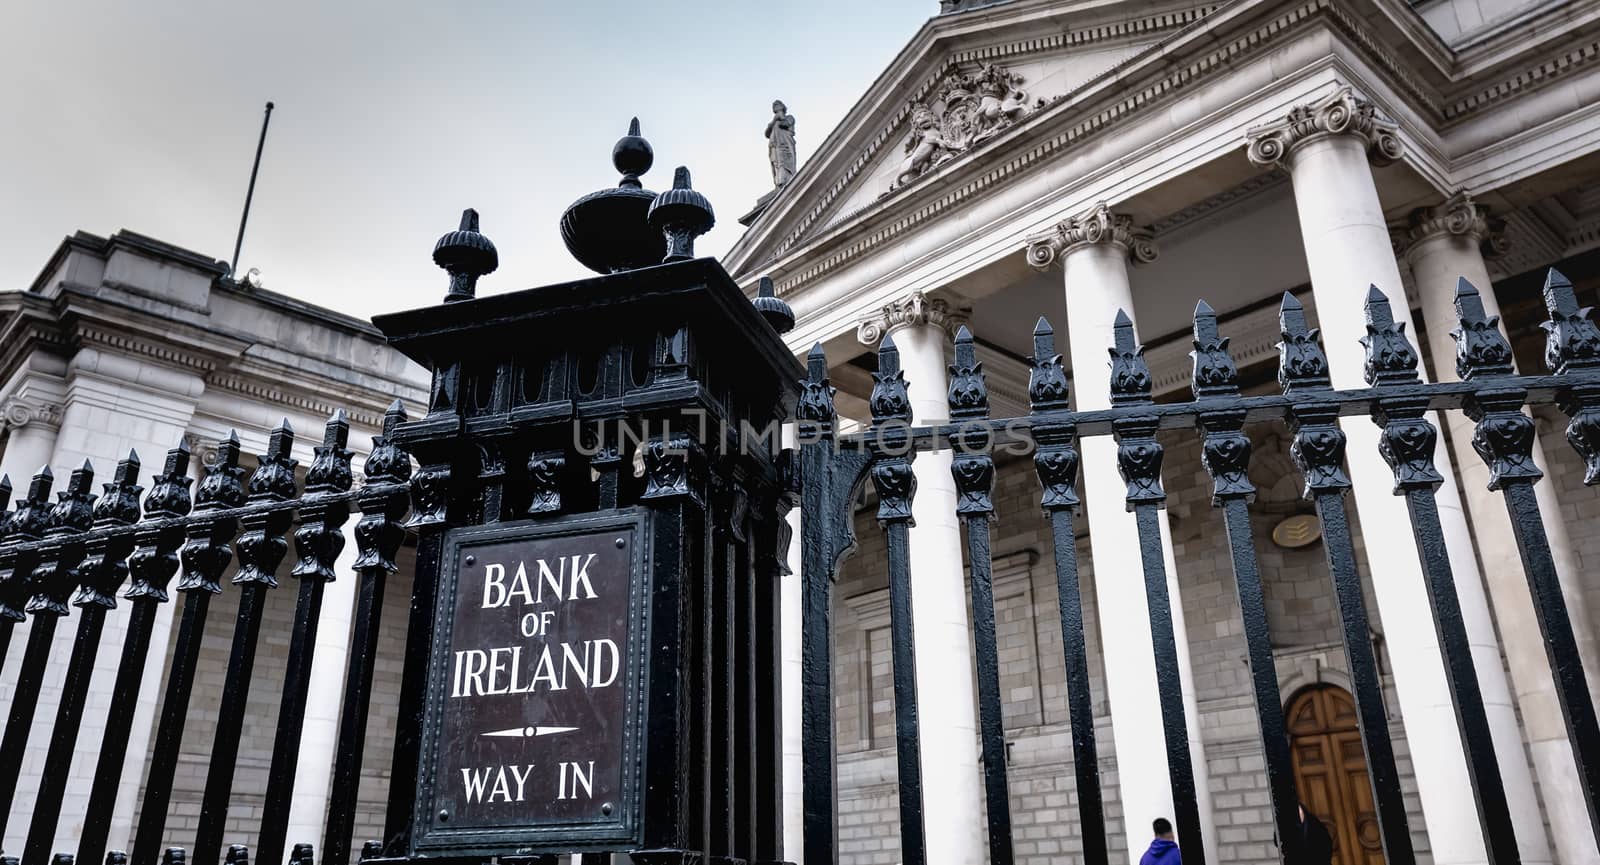 Dublin, Ireland - February 11, 2019: Architecture detail of Bank of Ireland in the city center on a winter day